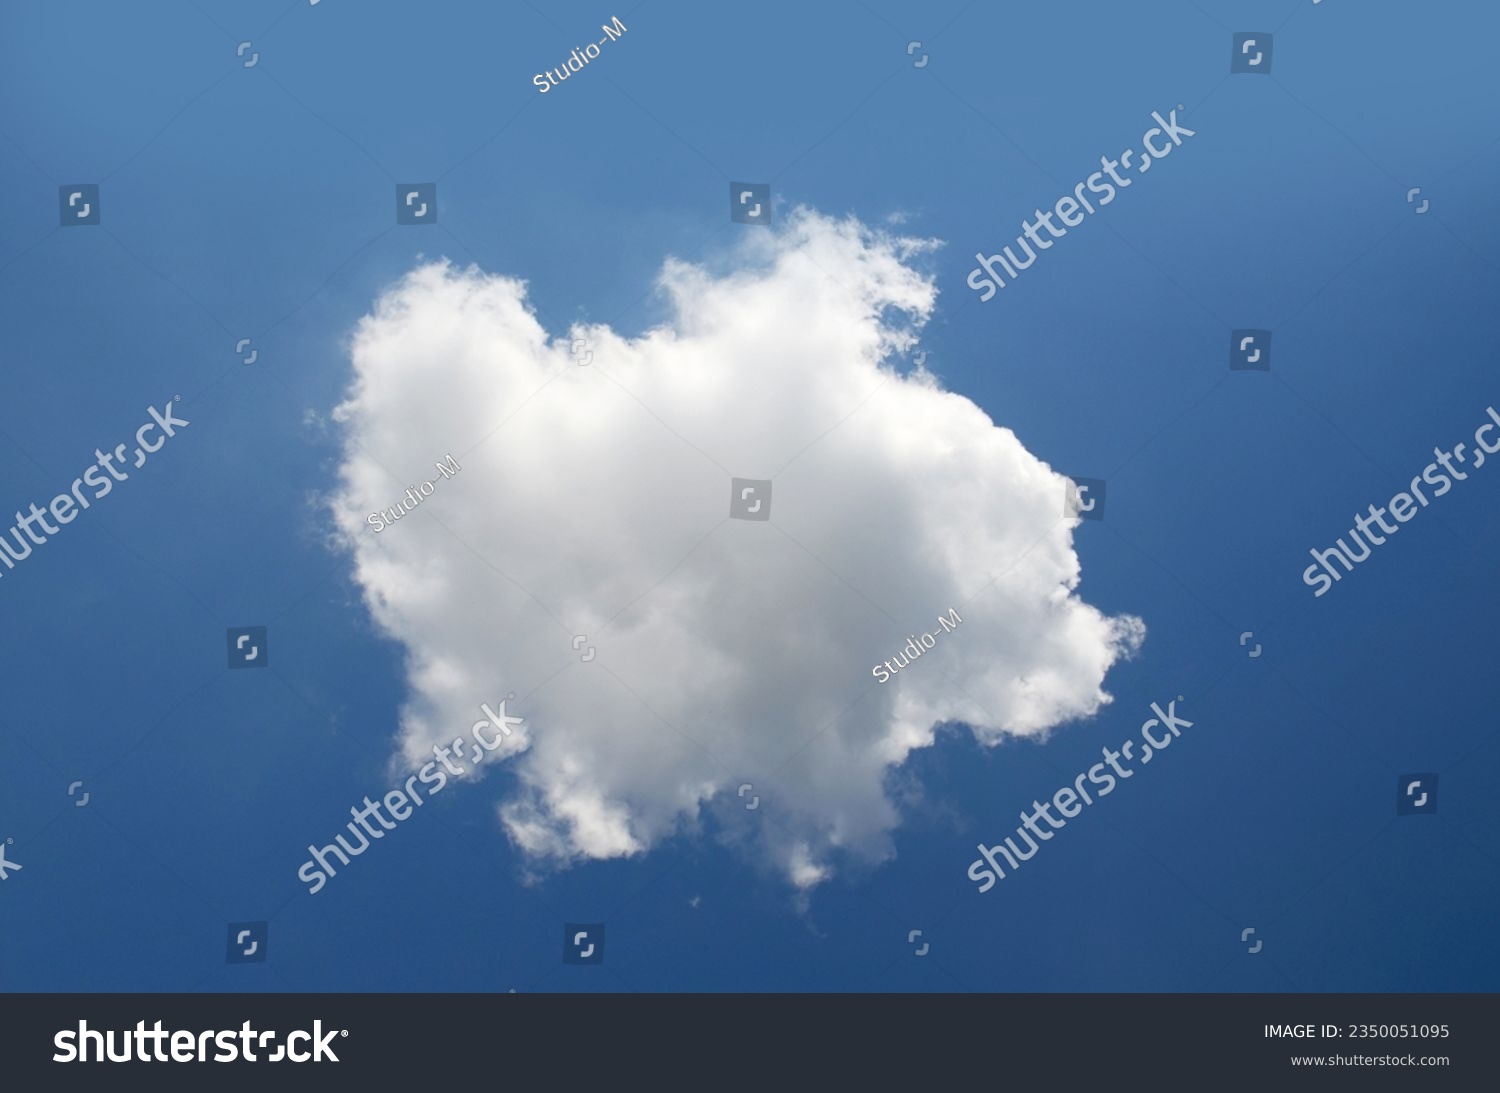 Single cloud isolated over blue sky background. White cloud photo, cute fluffy puffy cloud and gradient summer sky #2350051095